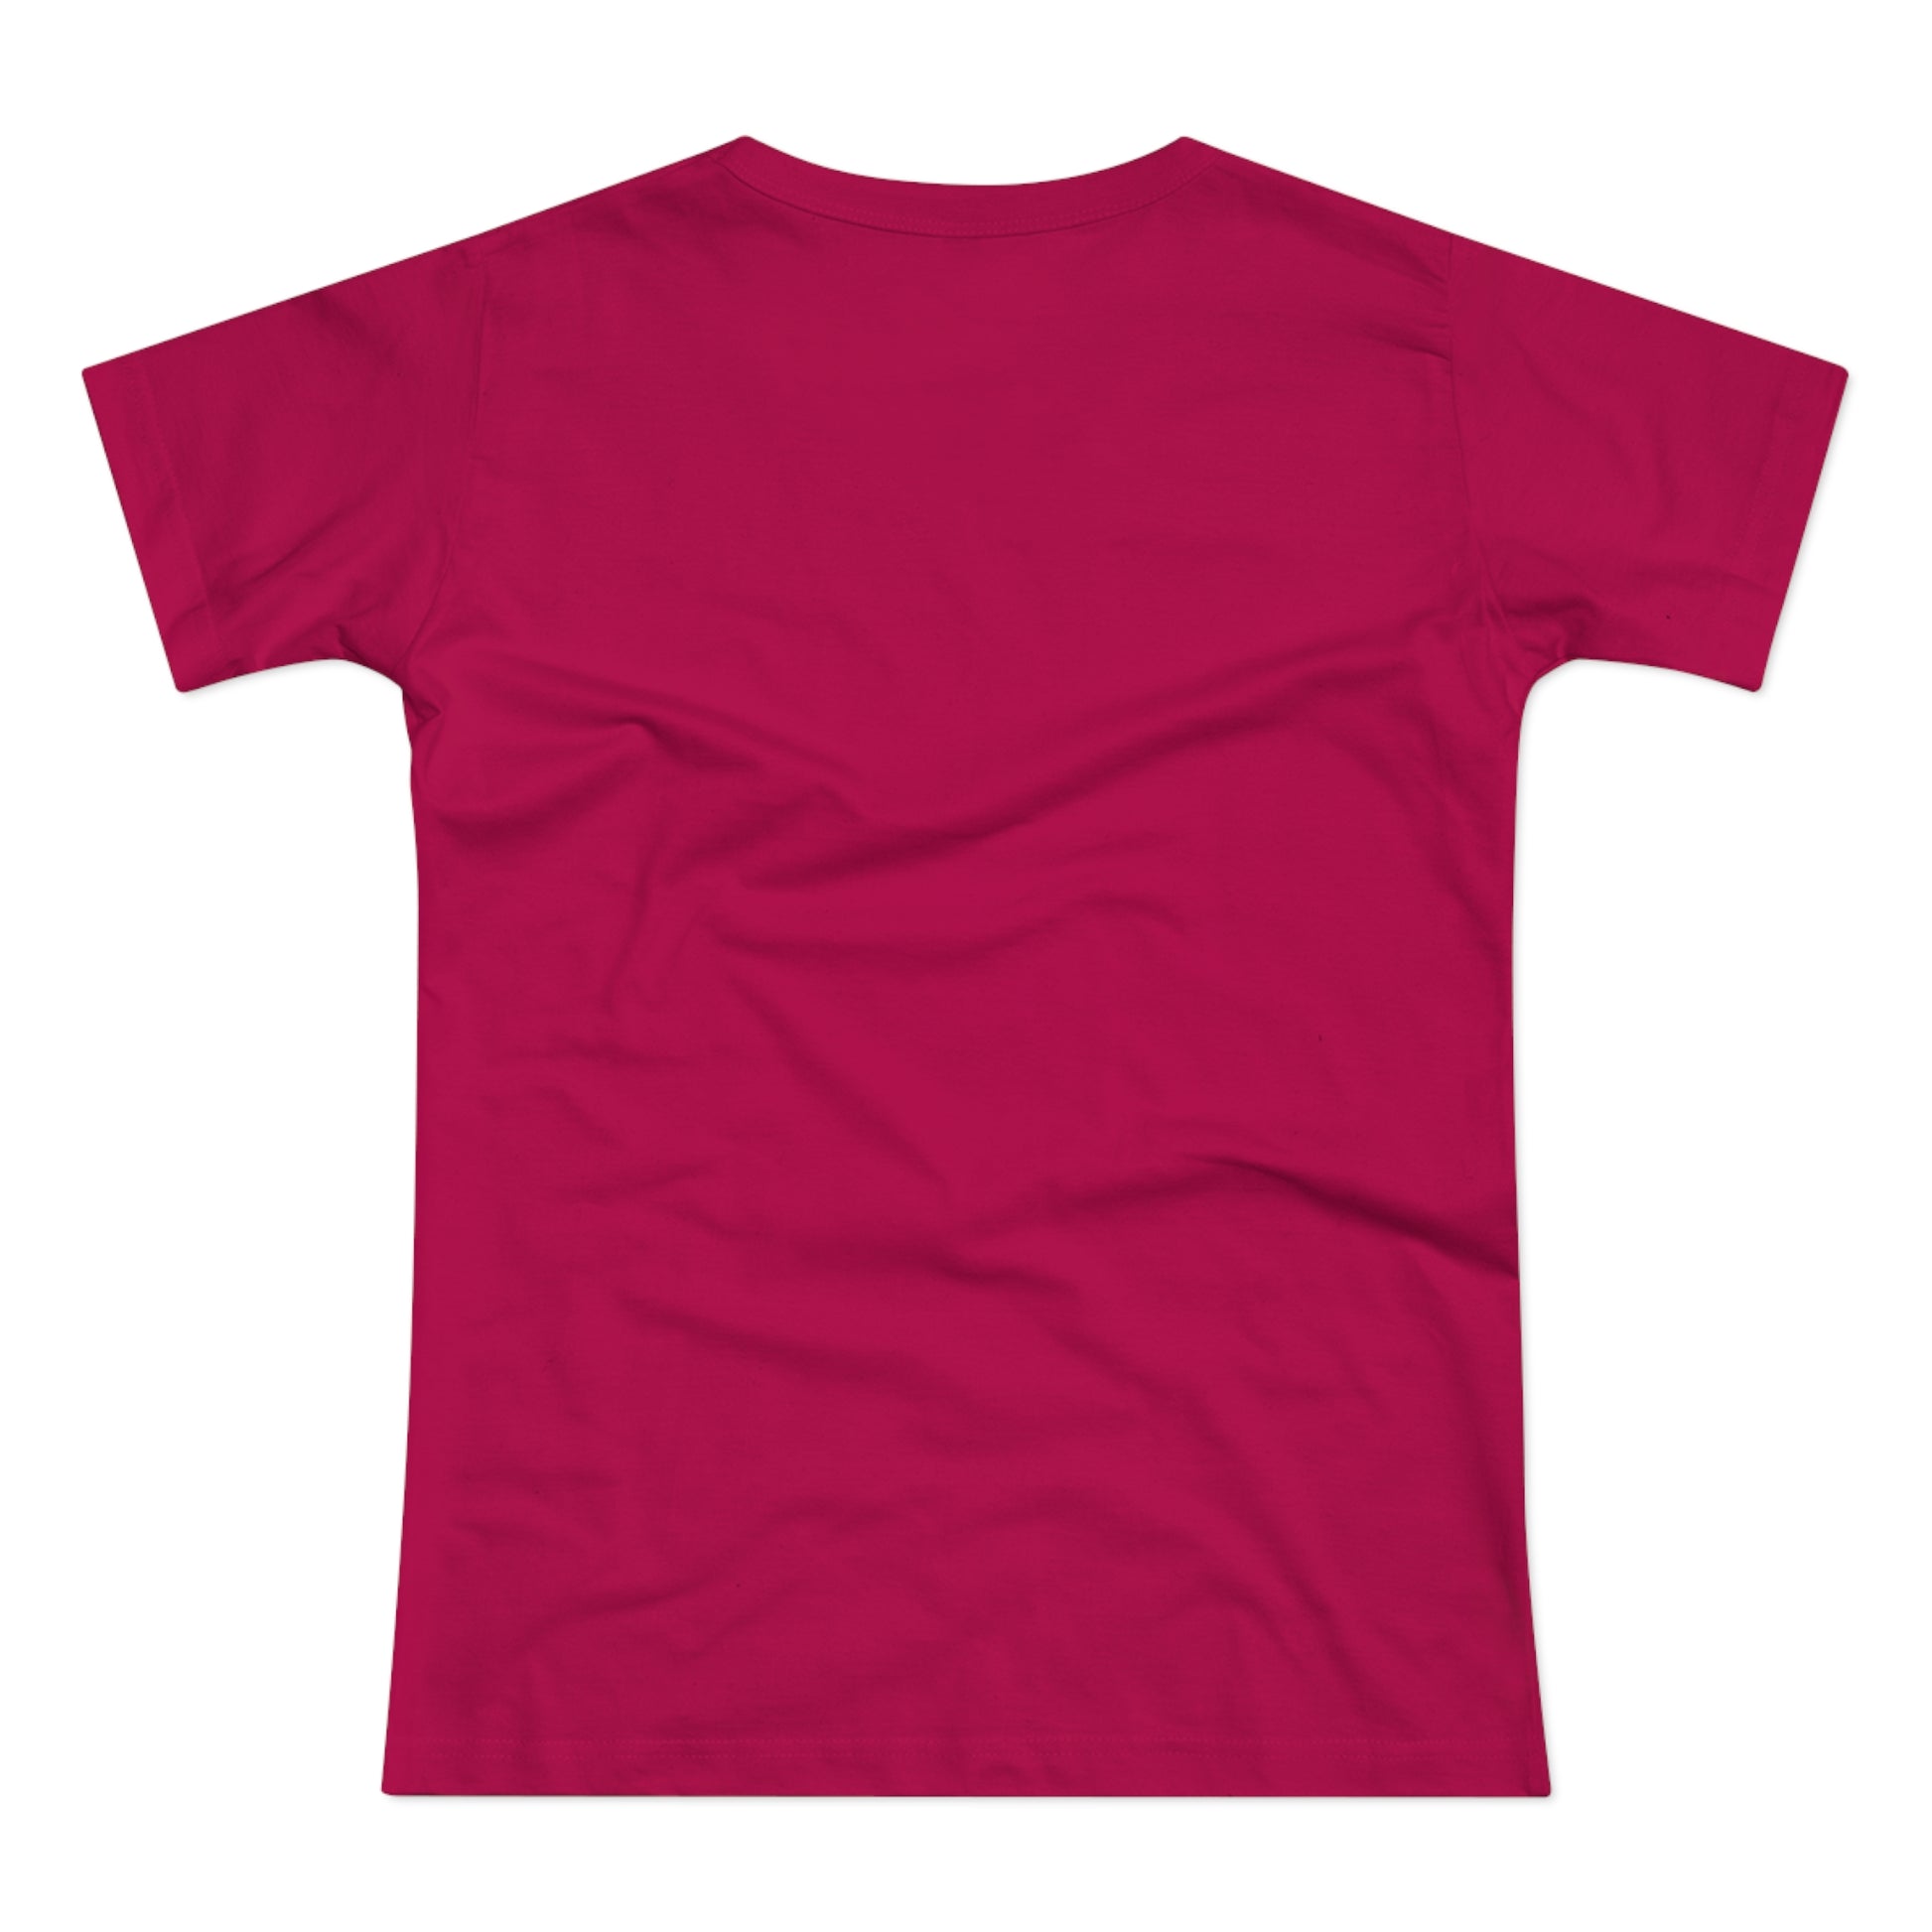 a women's t - shirt with a red background